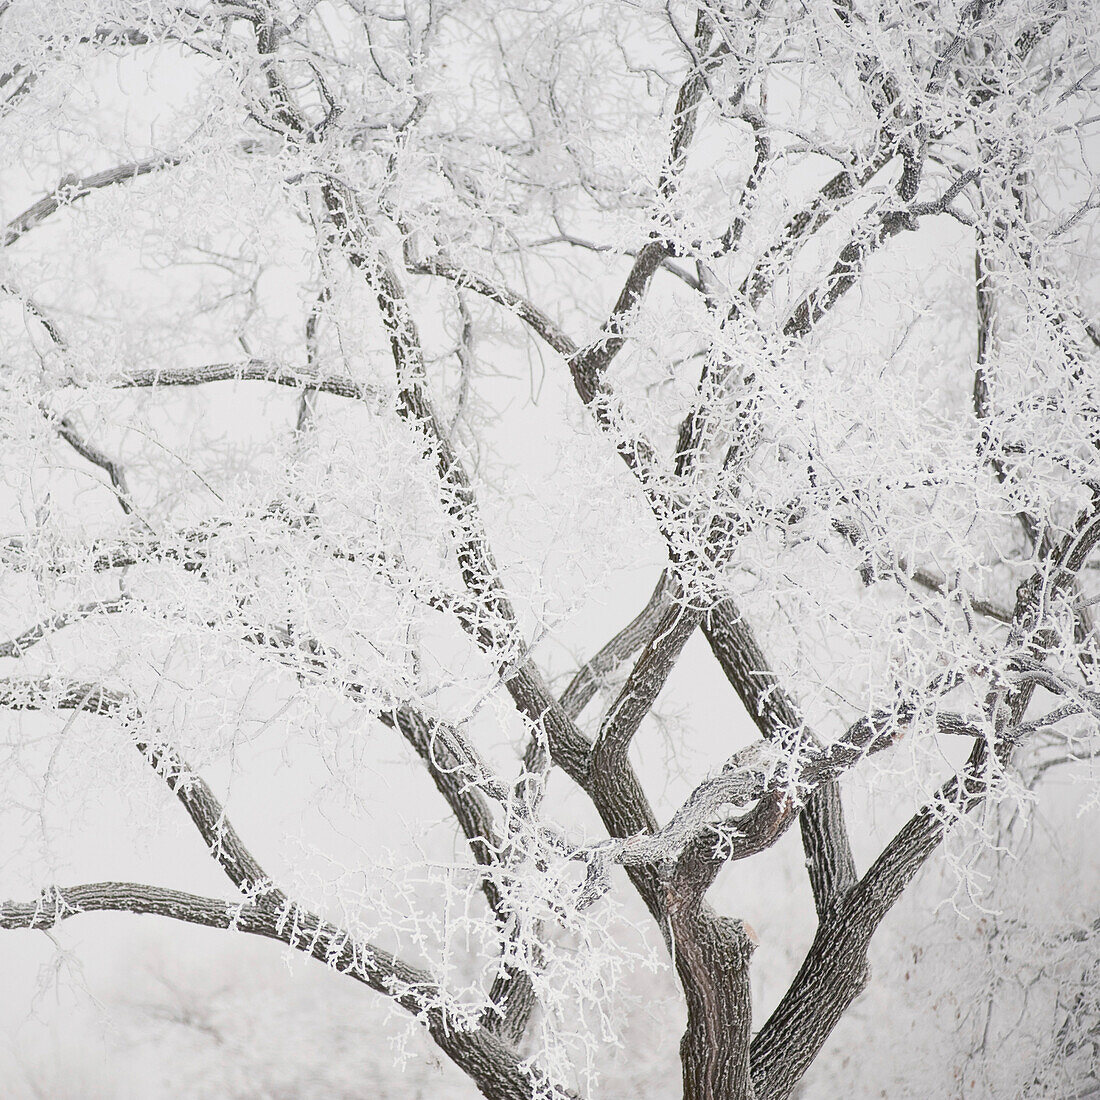 'Winnipeg, Manitoba, Canada; Tree Branches Covered In Snow'